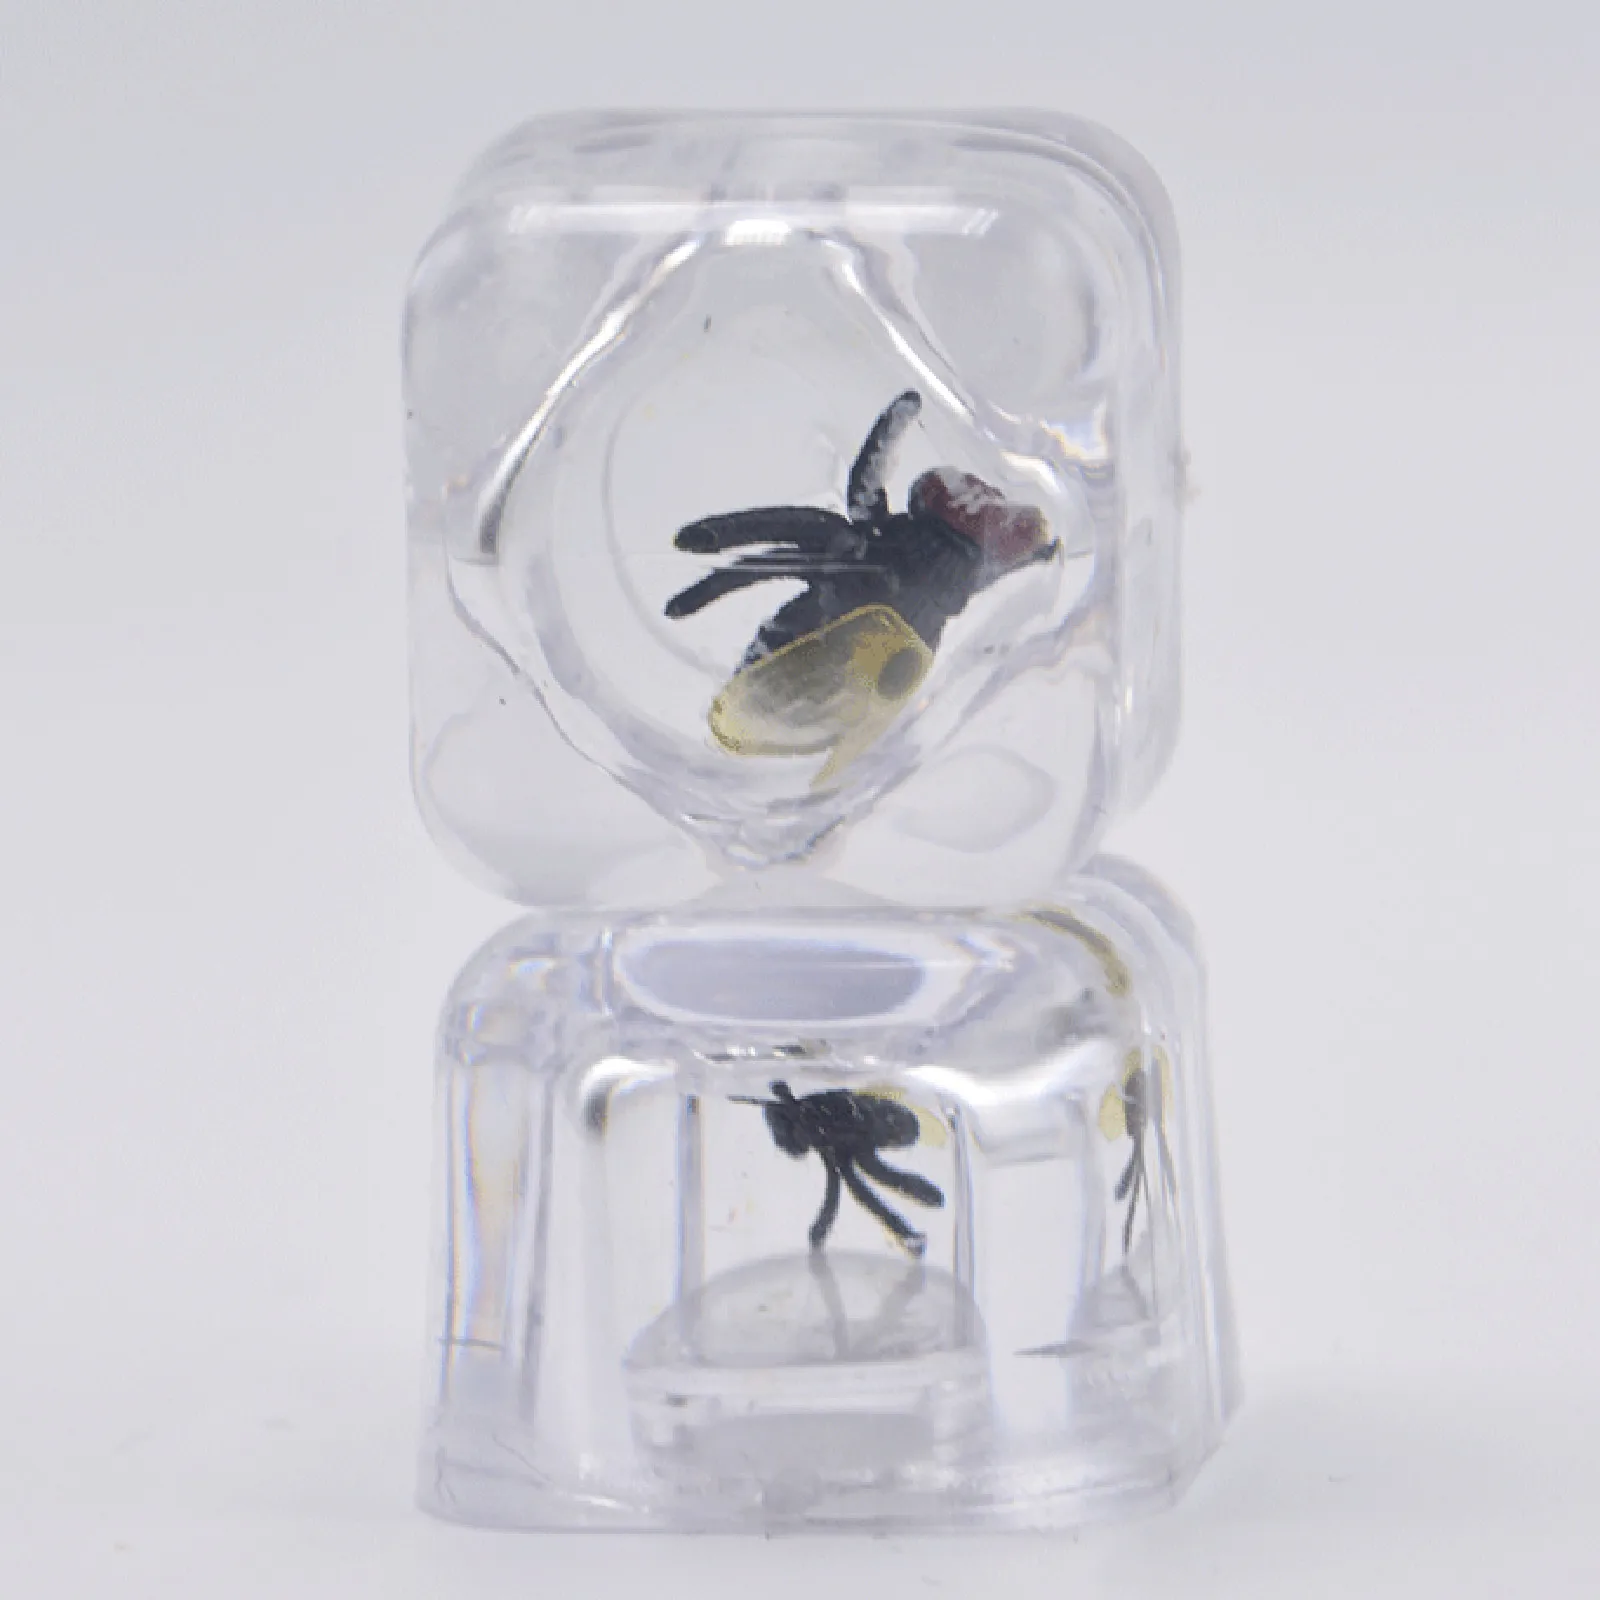 

Plastic Simulation Fake Insect Flies Insect Trick Tricky Novelty Toy ice worm fly caterpillar scary prank April Fools Day Toy W*